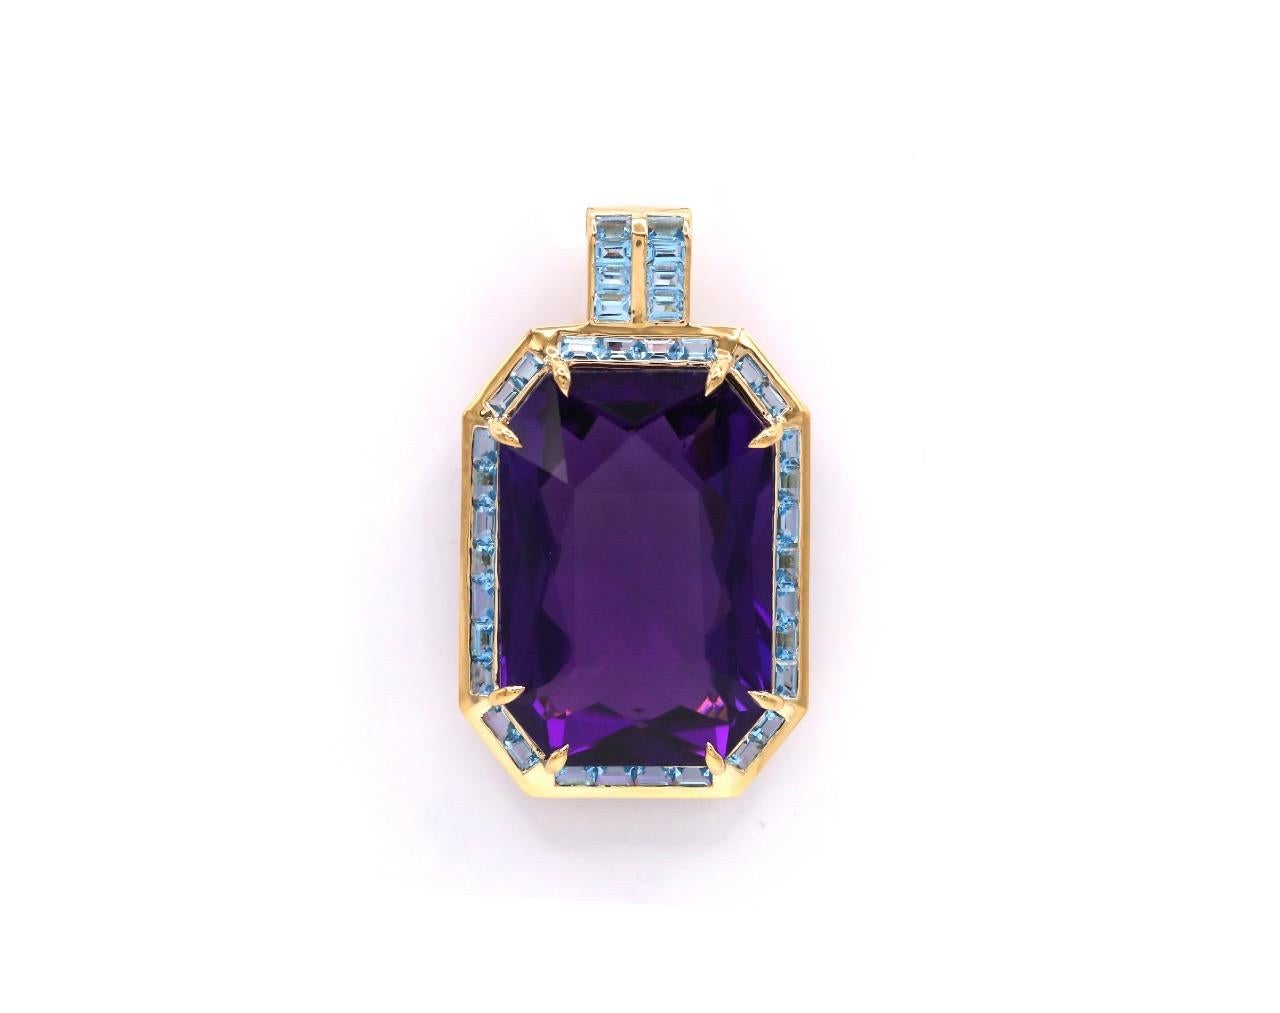 This stunning necklace featuring blue topaz and quartz is inspired by oriental motives. This great 66.46 Ct 31.20 x 21.40 x 13.70 mm purple quartz is beautifully displayed on 18 K yellow gold and 38 blue topaz frame. This impressive gem pendant is